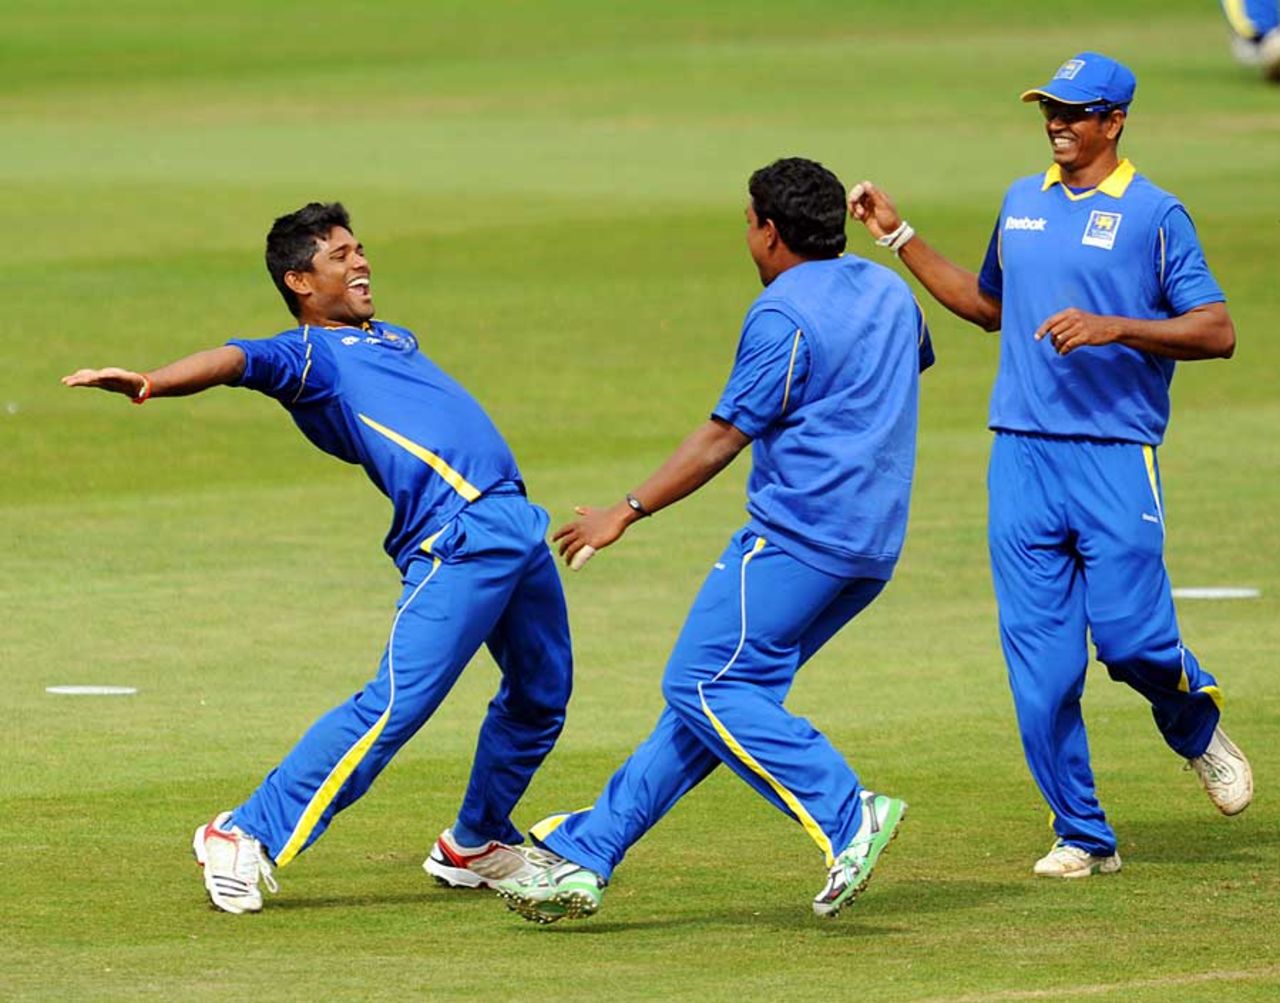 Seekkuge Prasanna celebrates one of his six wickets, England Lions v Sri Lanka A, 2nd one-dayer, New Road, August 14, 2011